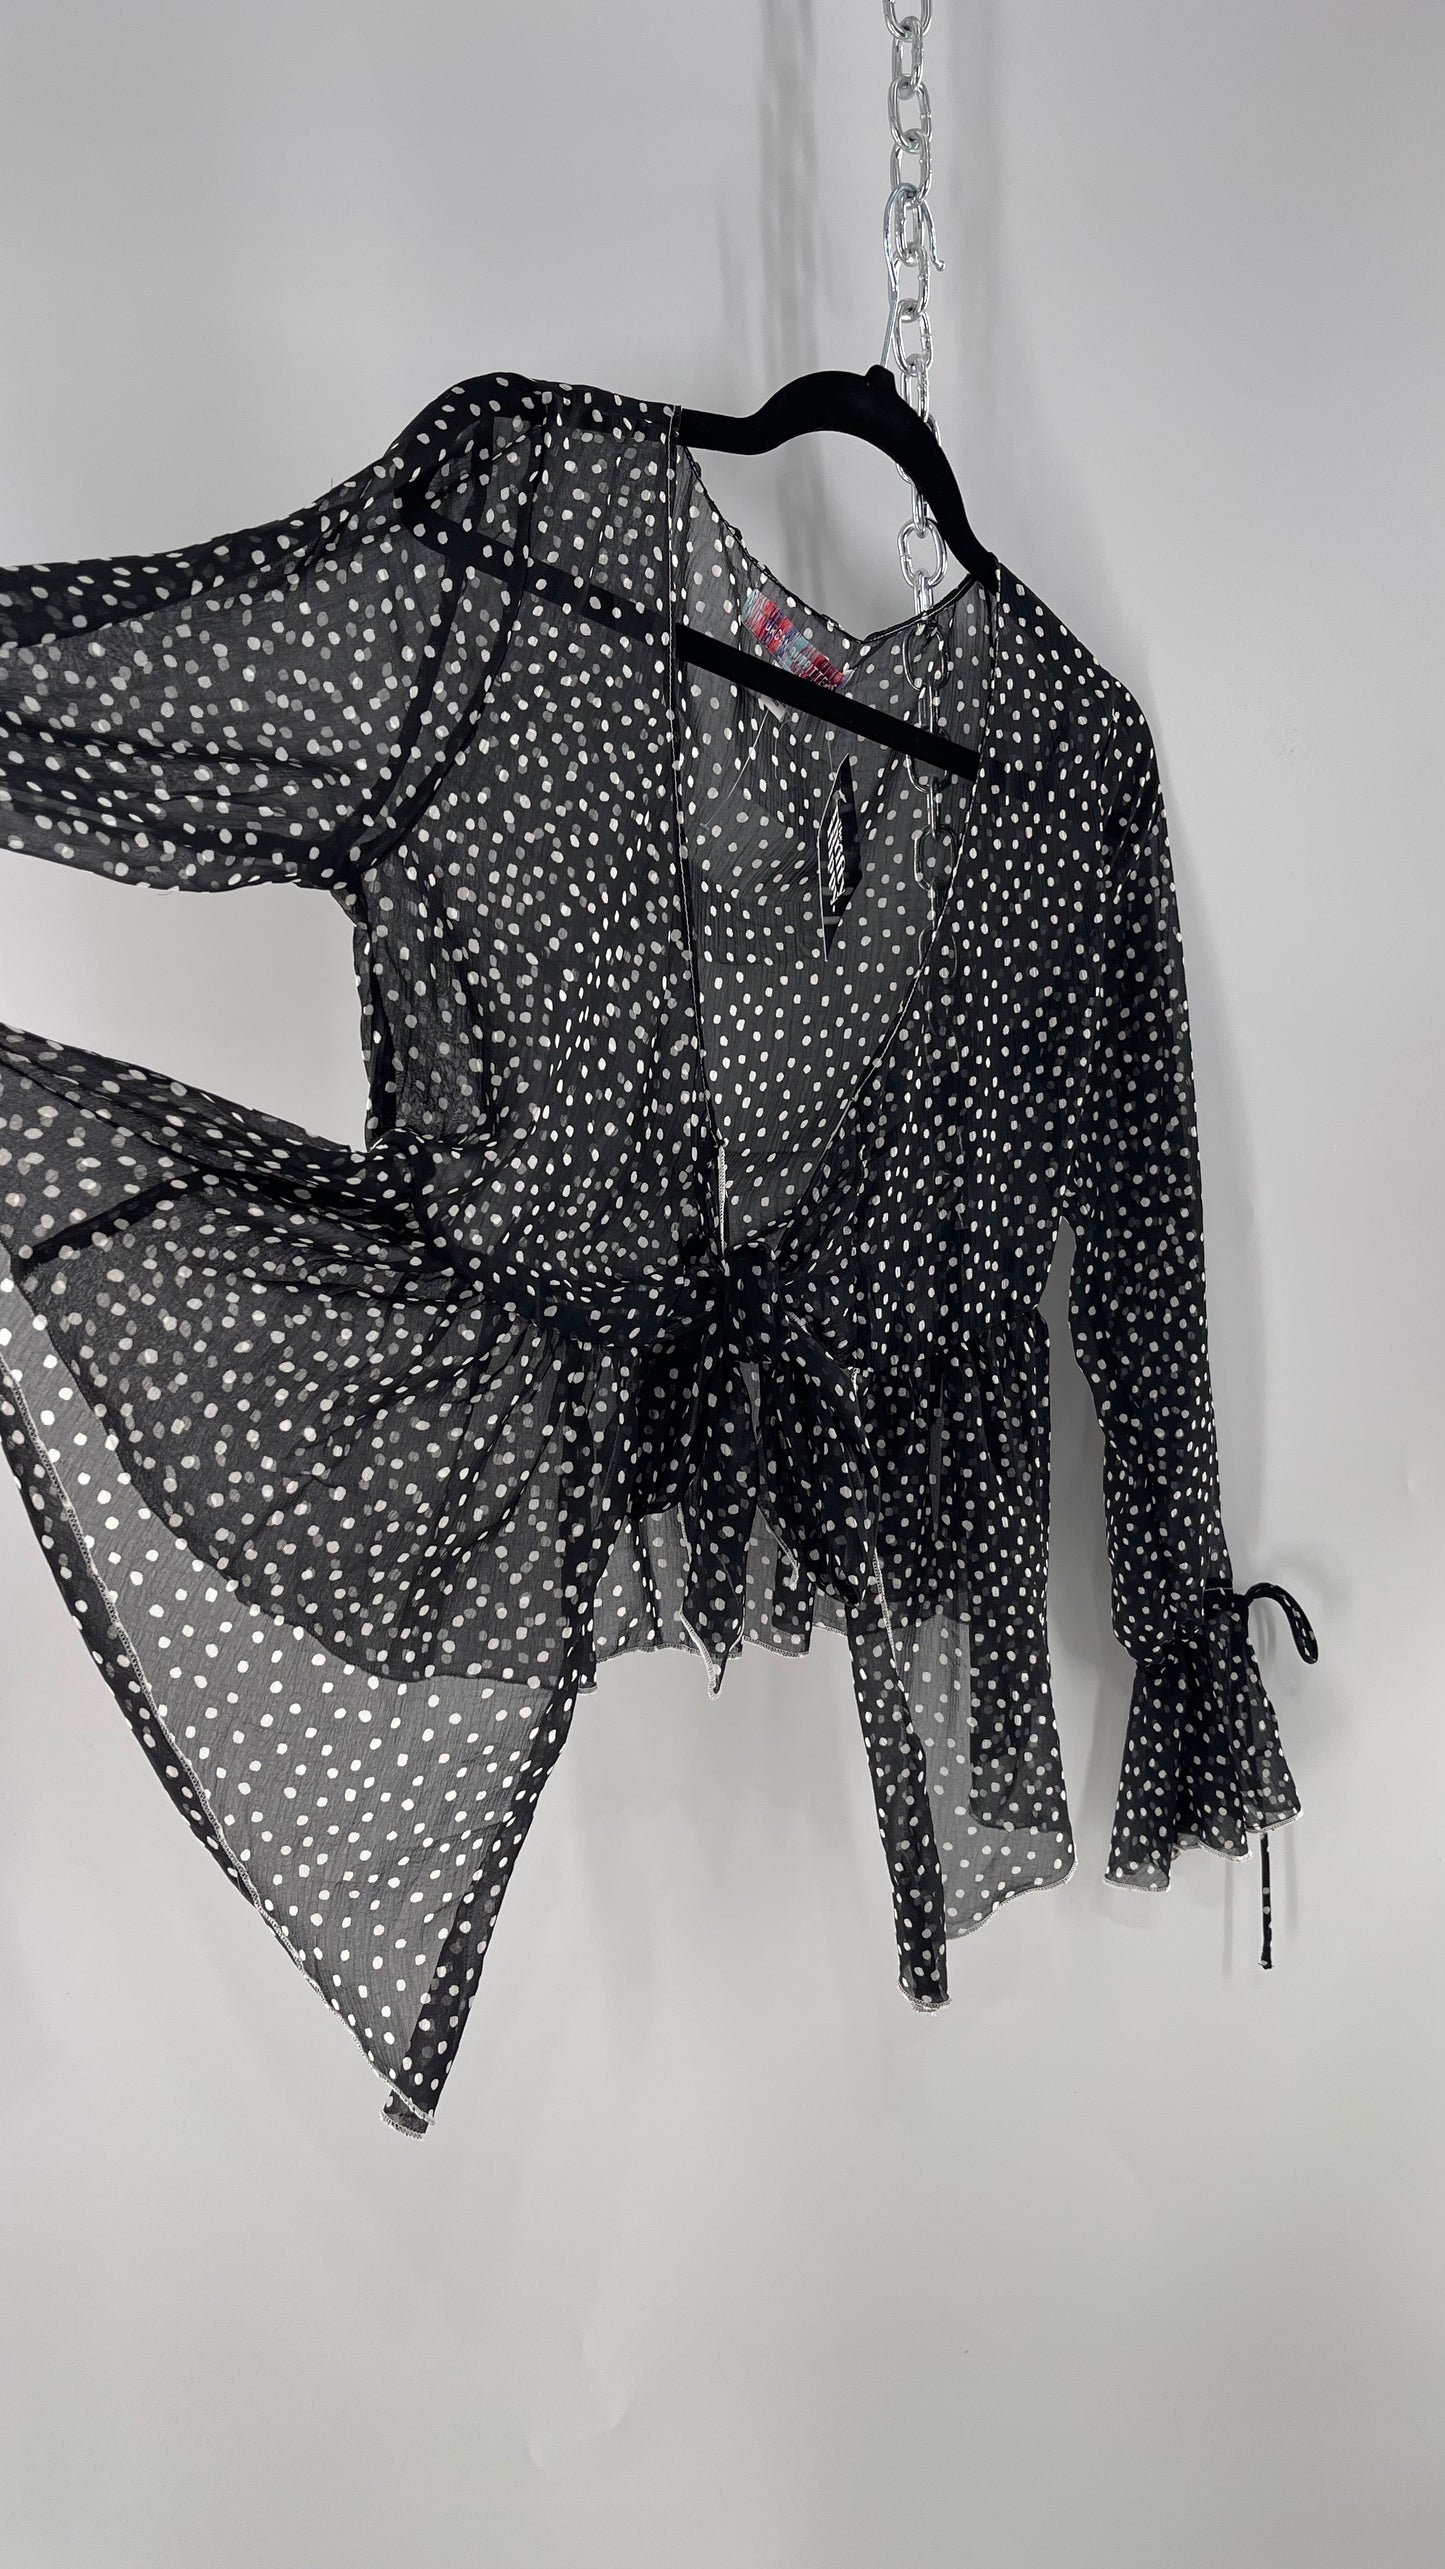 Urban Outfitters Black and White Polka Dot Tie Front Blouse with Tie Sleeve Detail (Small)